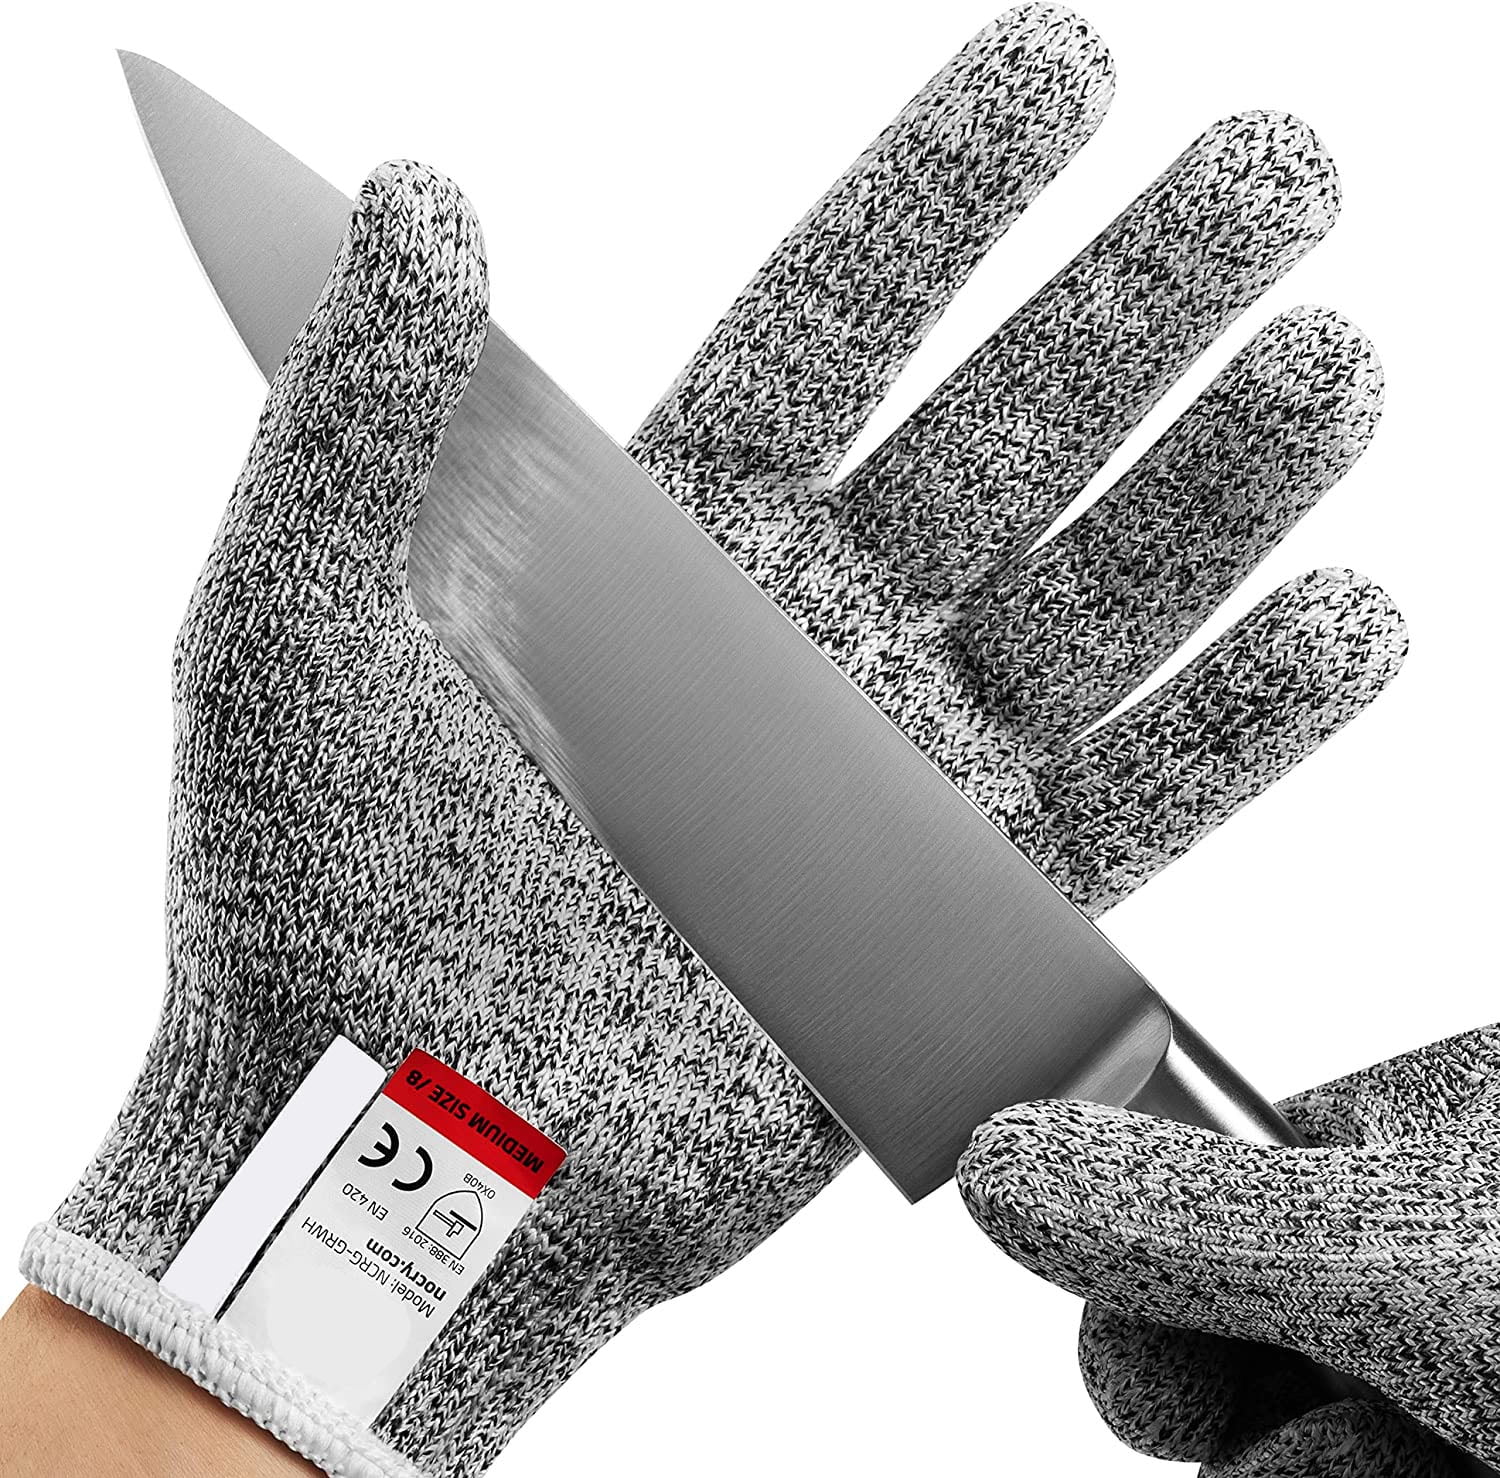 Work Gloves Cut resistant CE Level 5 ANSI CUT 3 Protective Cutting Anti-cut  Gloves For Construction Mechanics Gardening Glove